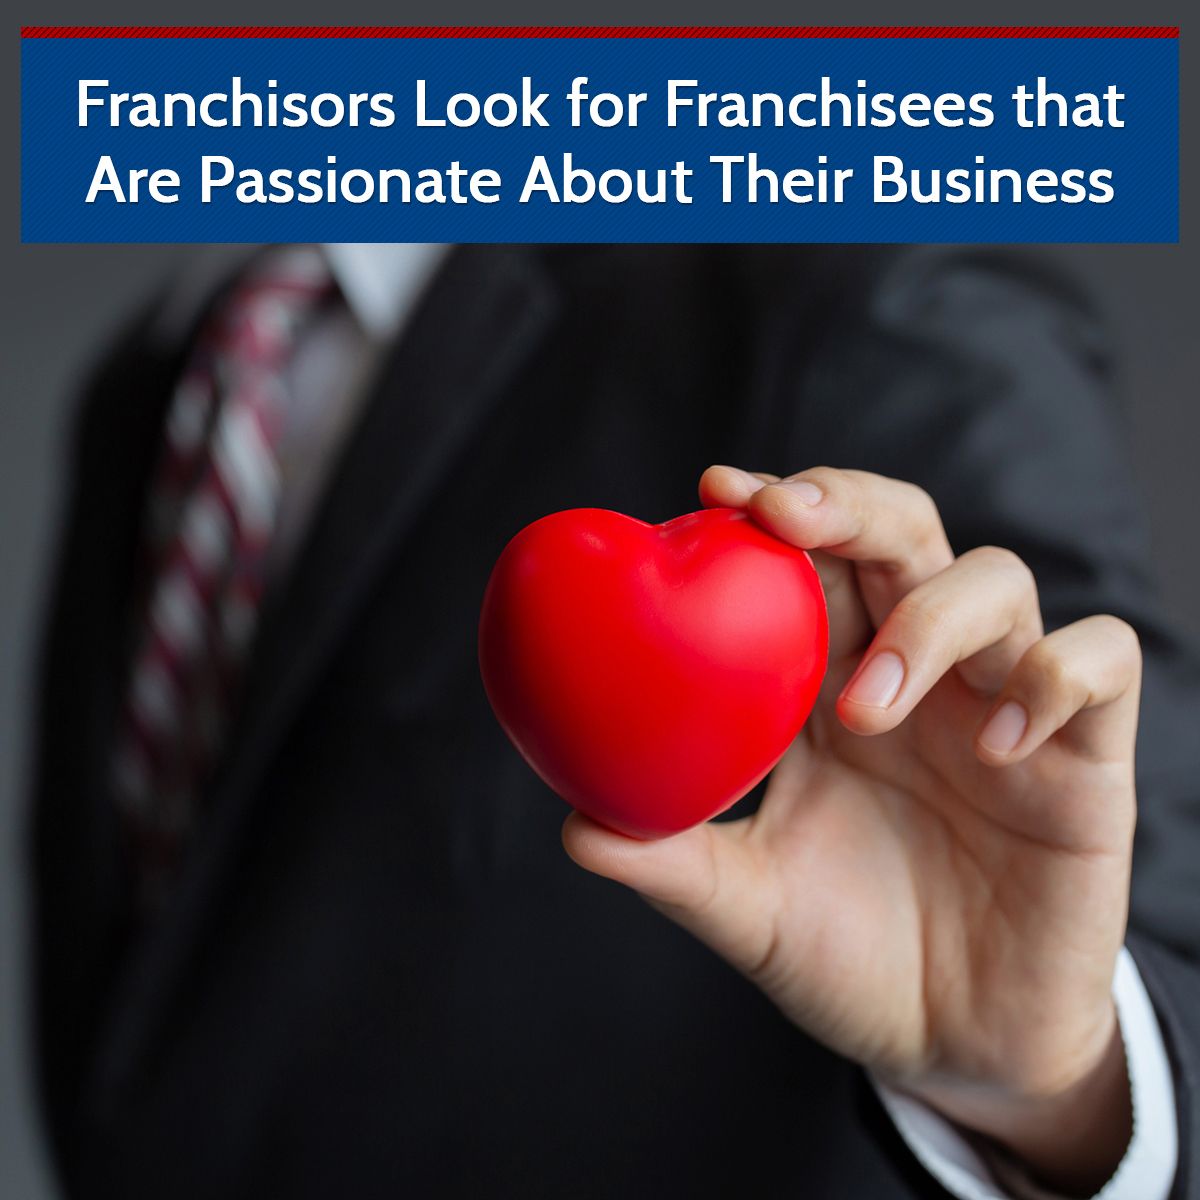 Franchisors Look for Franchisees that Are Passionate About Their Business